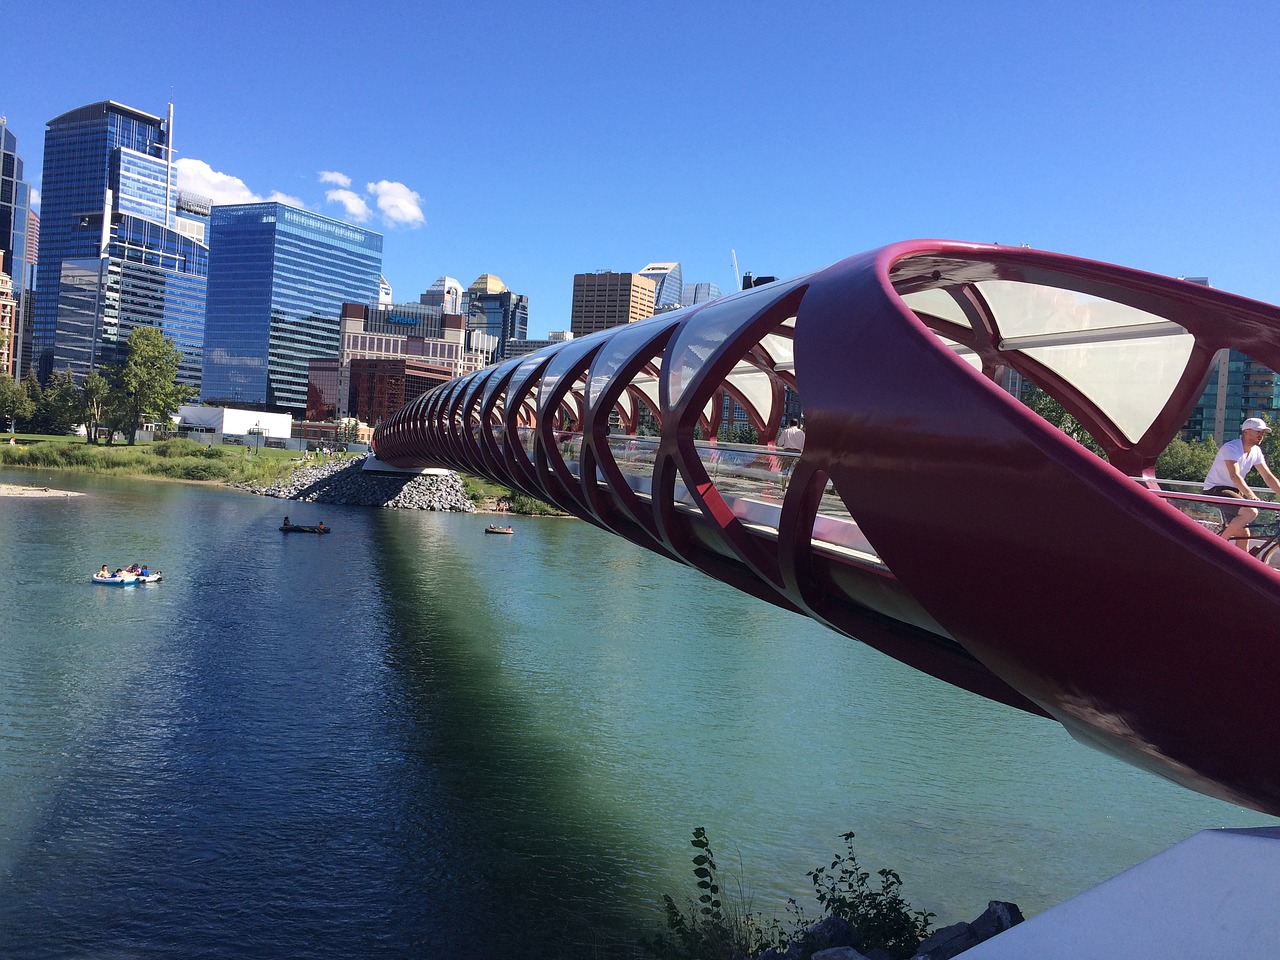 Calgary’s network of river parks and pathways is one of its most acclaimed characteristics.